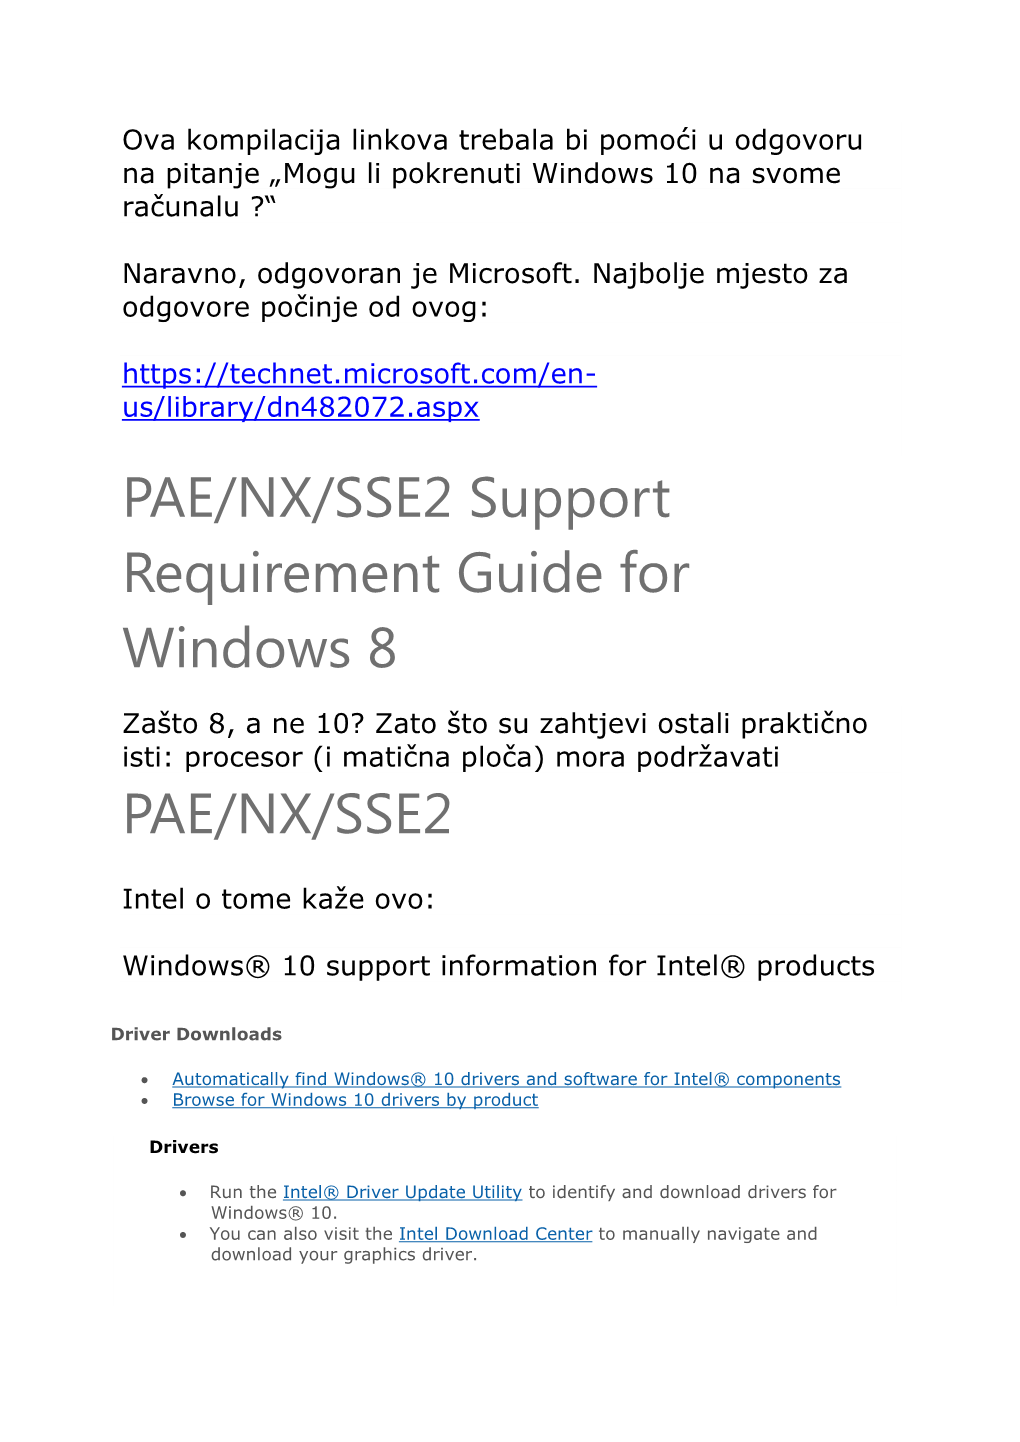 PAE/NX/SSE2 Support Requirement Guide for Windows 8 PAE/NX/SSE2